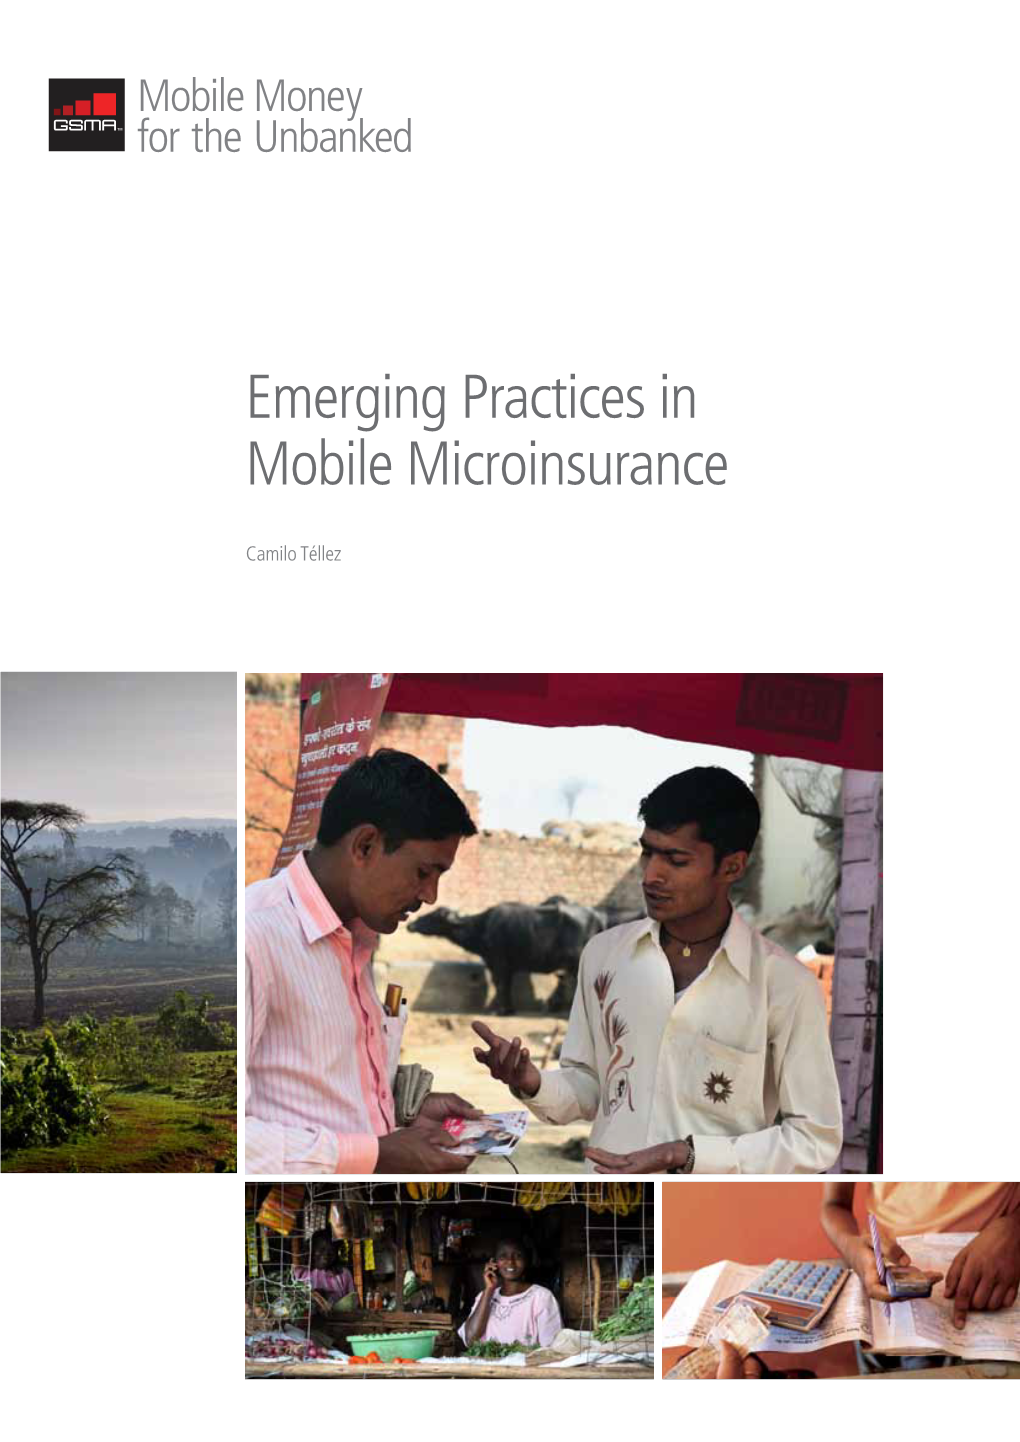 Emerging Practices in Mobile Microinsurance